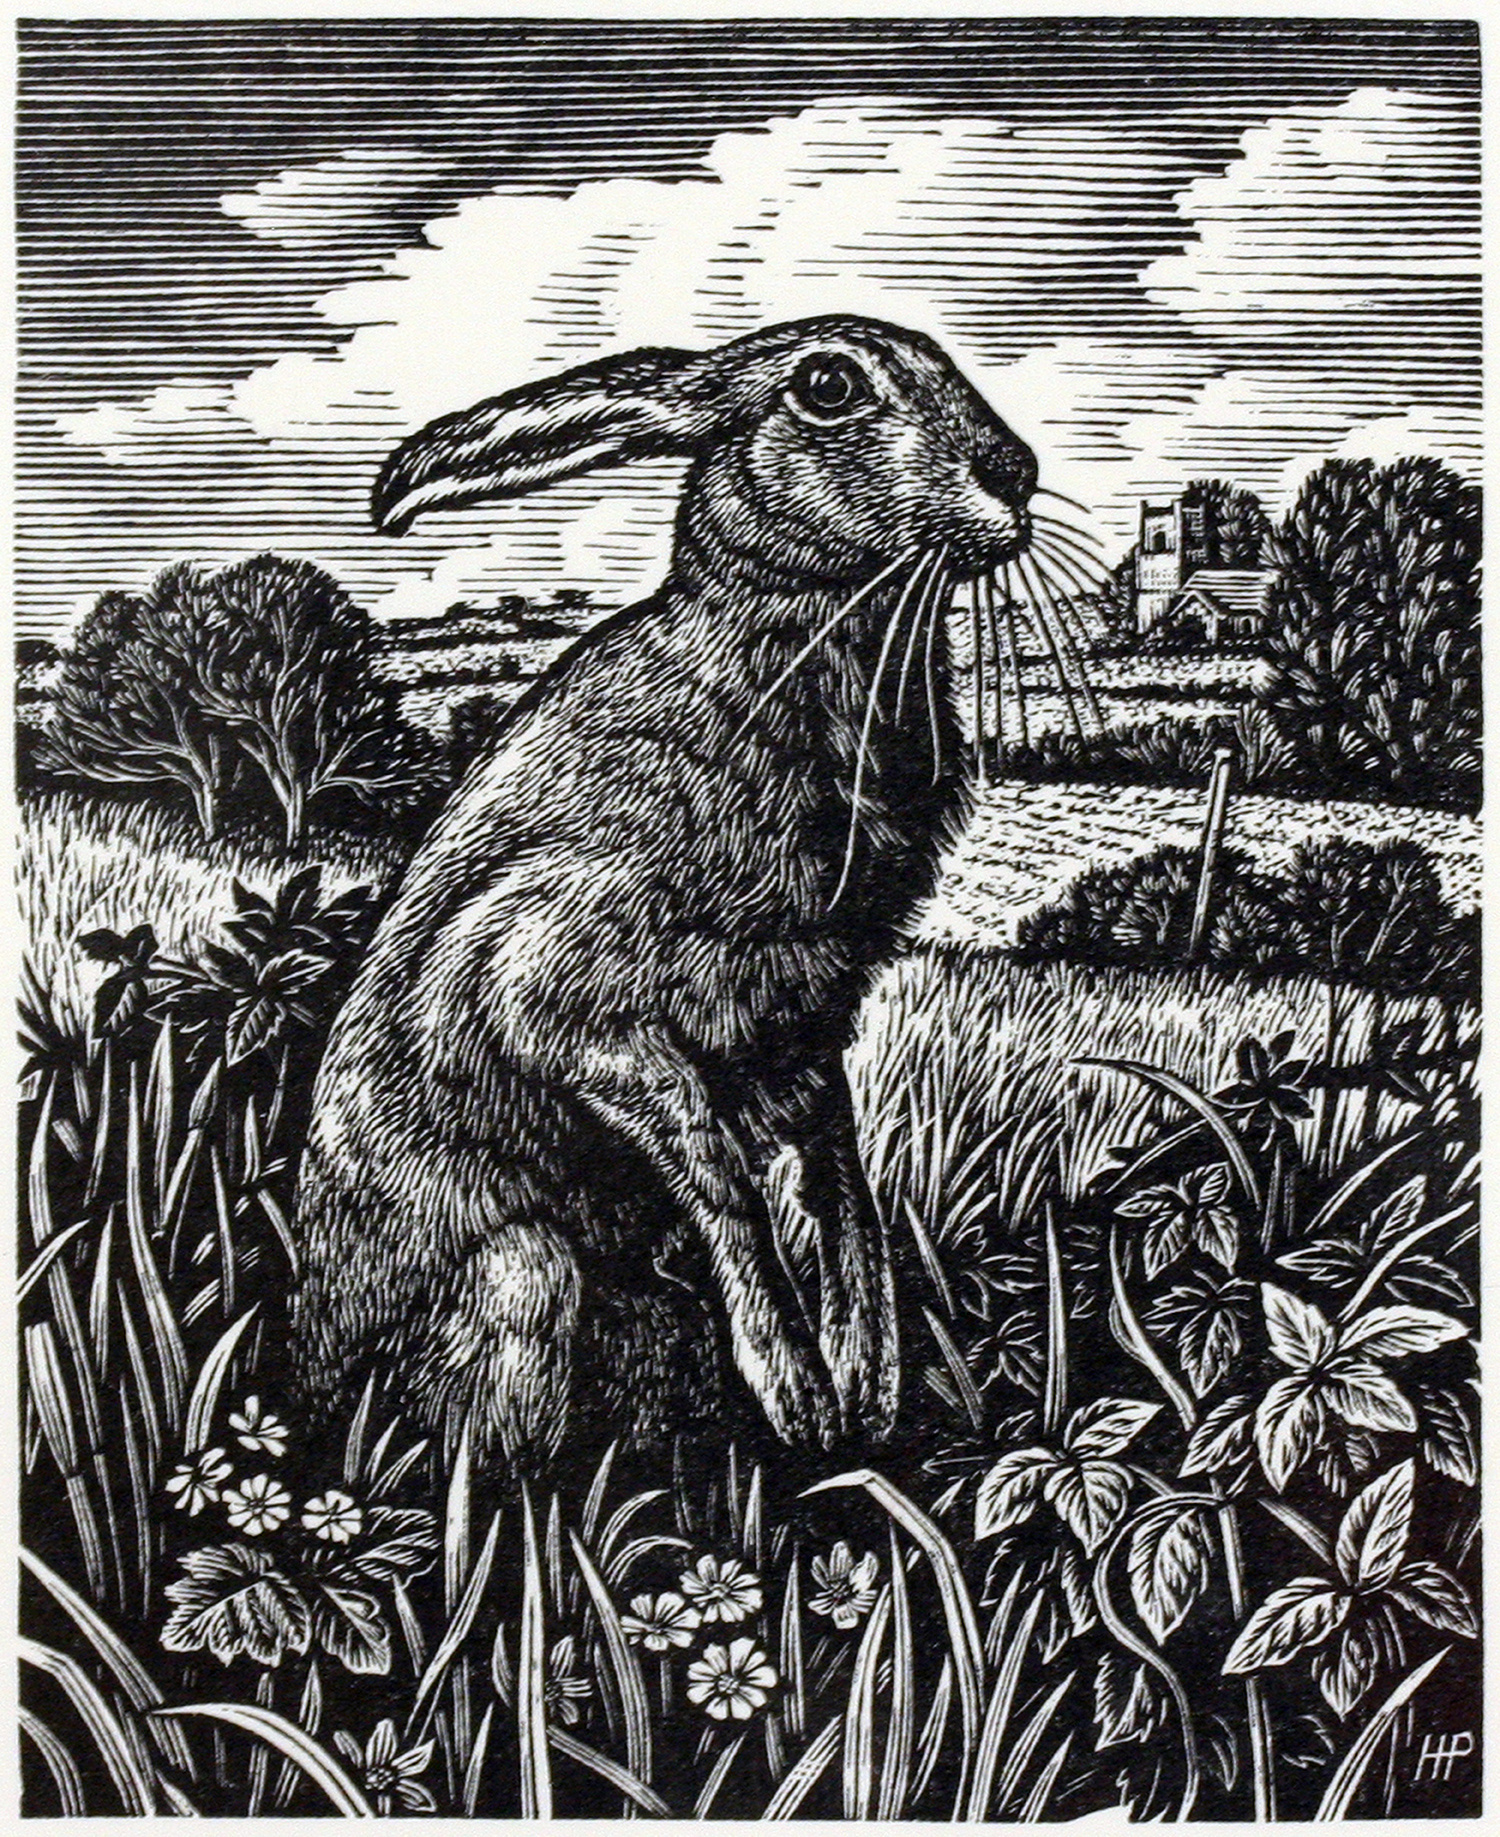 March Hare by Howard Phipps